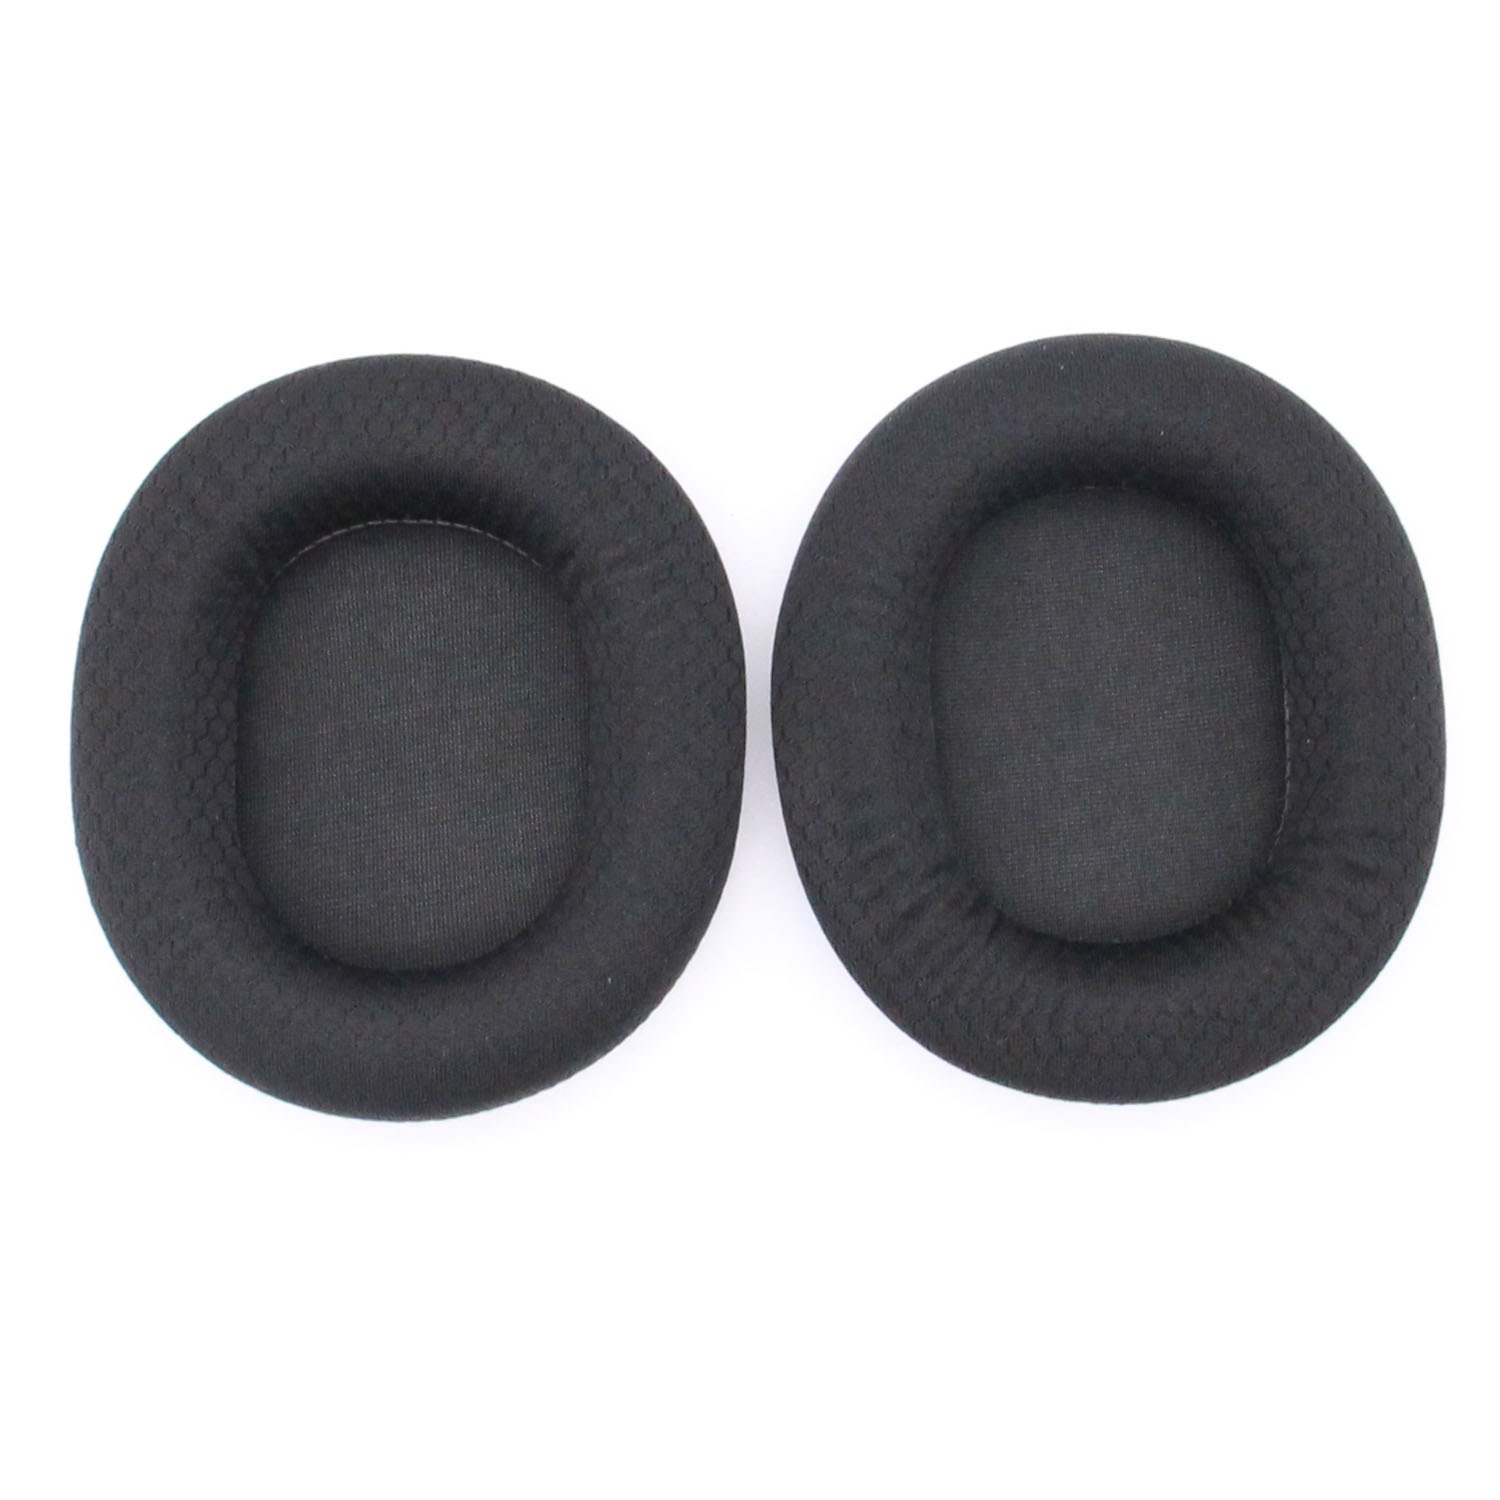 SteelSeries Arctis Gaming Headset Replacement Ear Pads